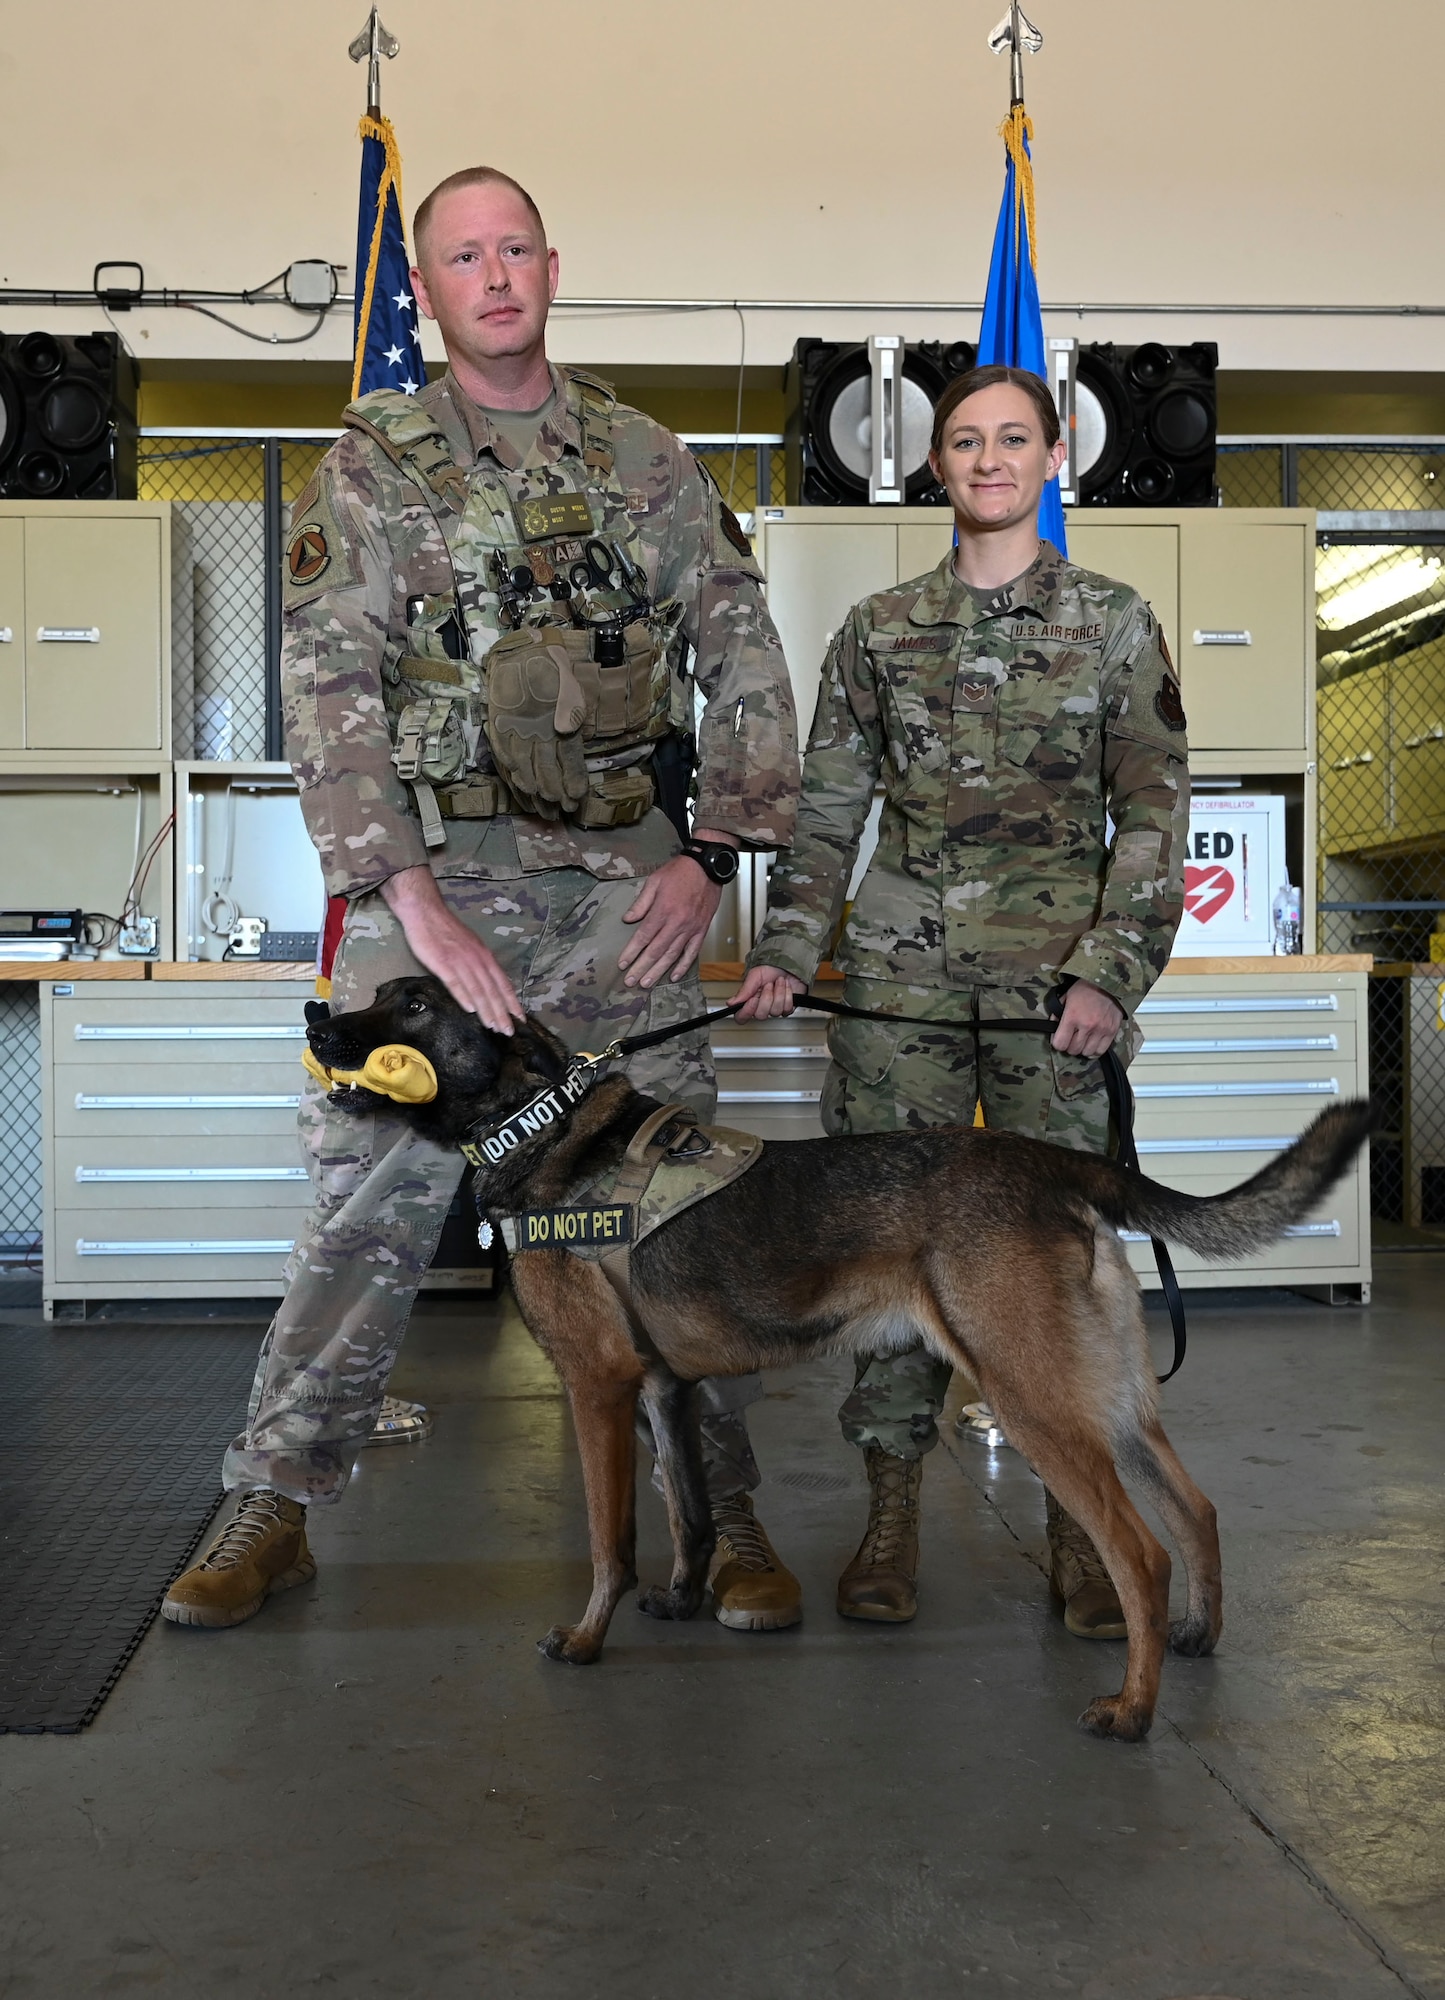 U.S. Air Force Master Sgt. Dustin Weeks, 14th Security Forces Squadron and Staff Sgt. Amber James, 14th Security Forces Squadron Military Working Dog handler, stand with Military Working Dog Ooleg #W136 during the K-9’s retirement ceremony, May 14, 2021, on Columbus Air Force Base, Miss. Weeks presented Ooleg his final bone as a symbol of his final reward, while on active duty. (U.S. Air Force photo by Airman 1st Class Jessica Haynie)